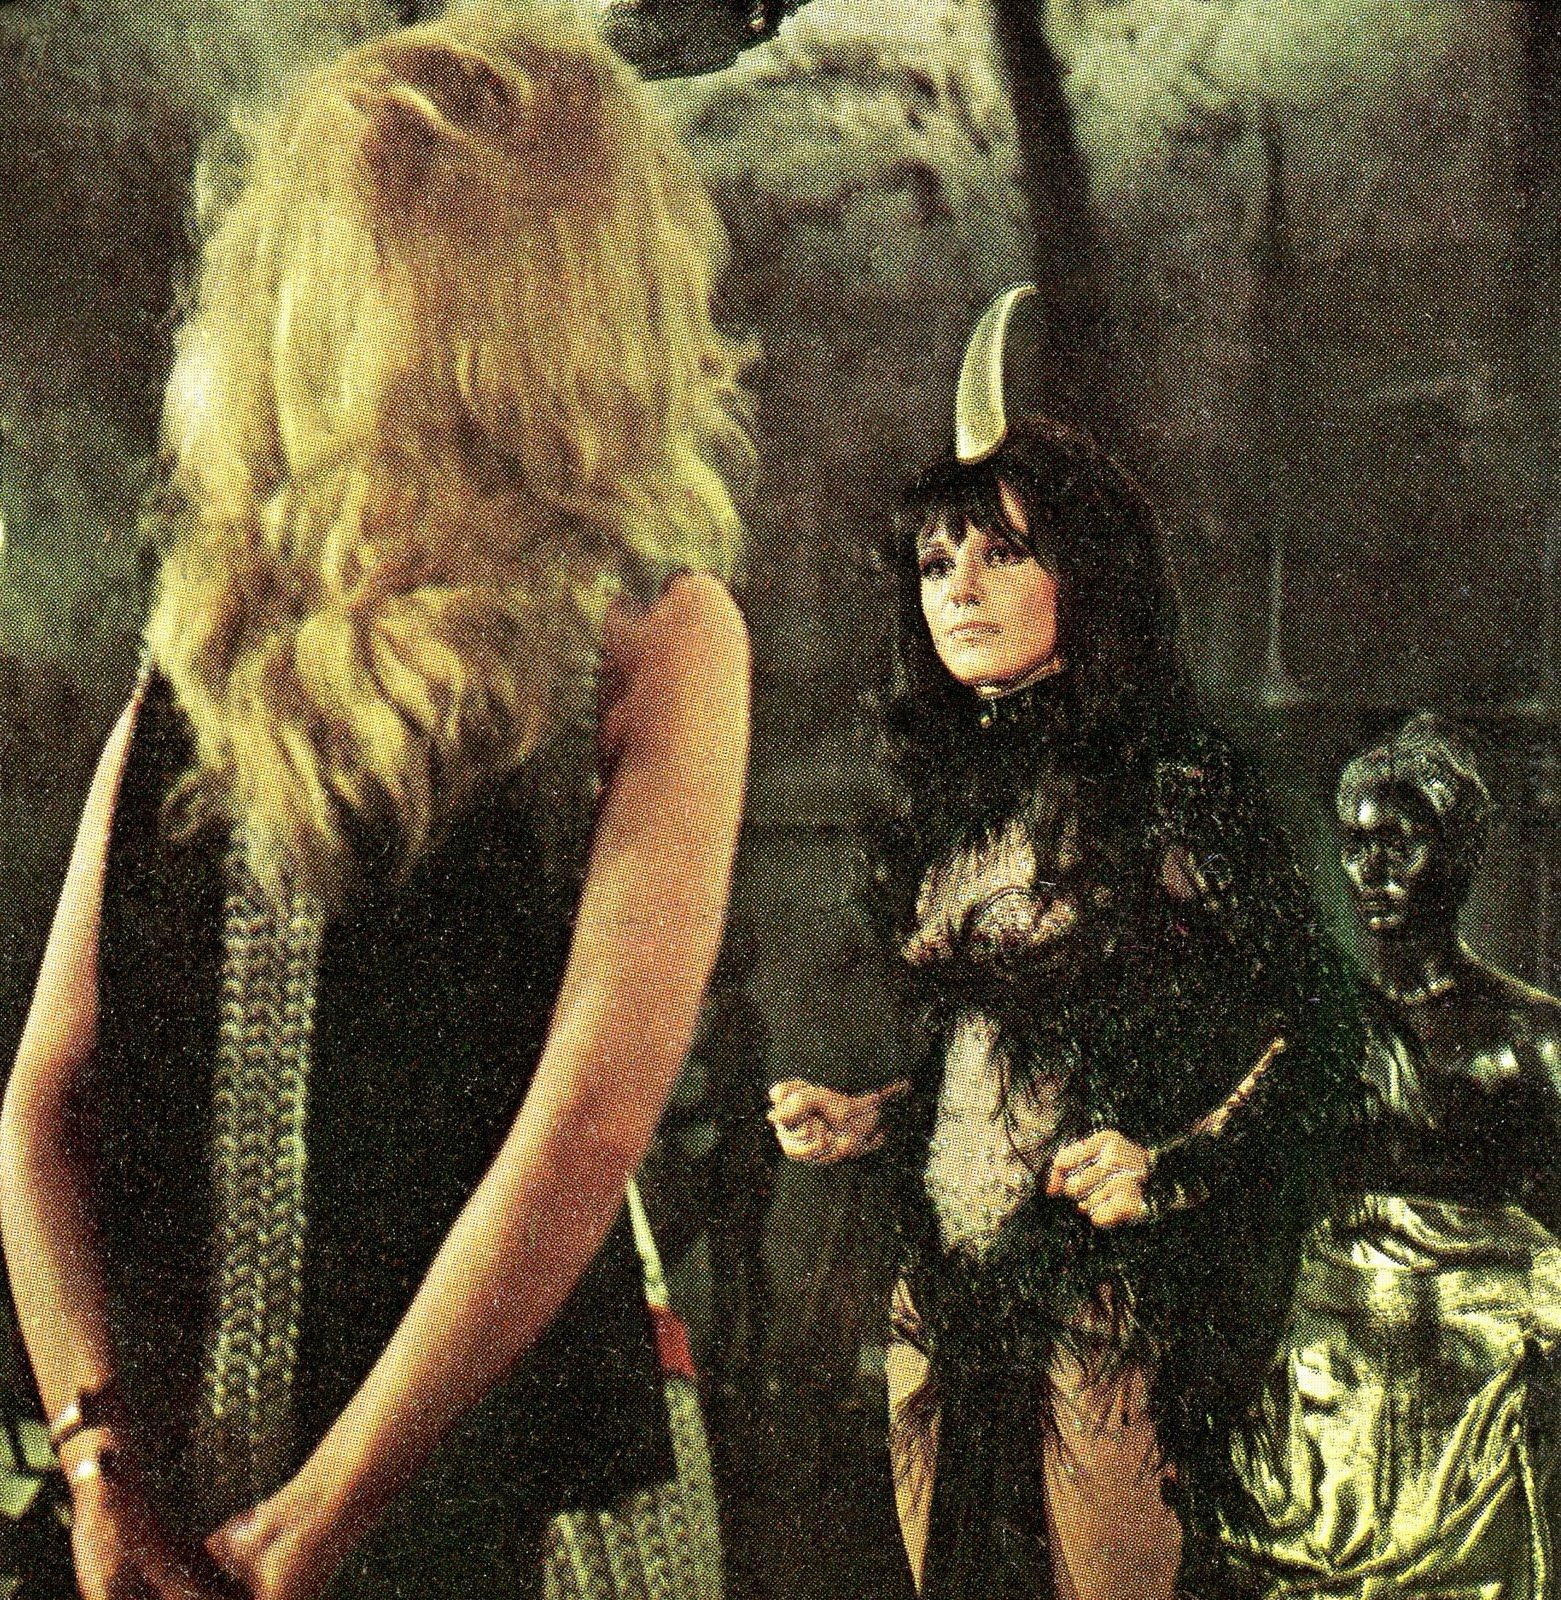 Anita Pallenberg: The Bizarre Beauty of Barbarella The Great Tyrant in her official attire. Barbarella, Anita pallenberg, Jane fonda barbarella